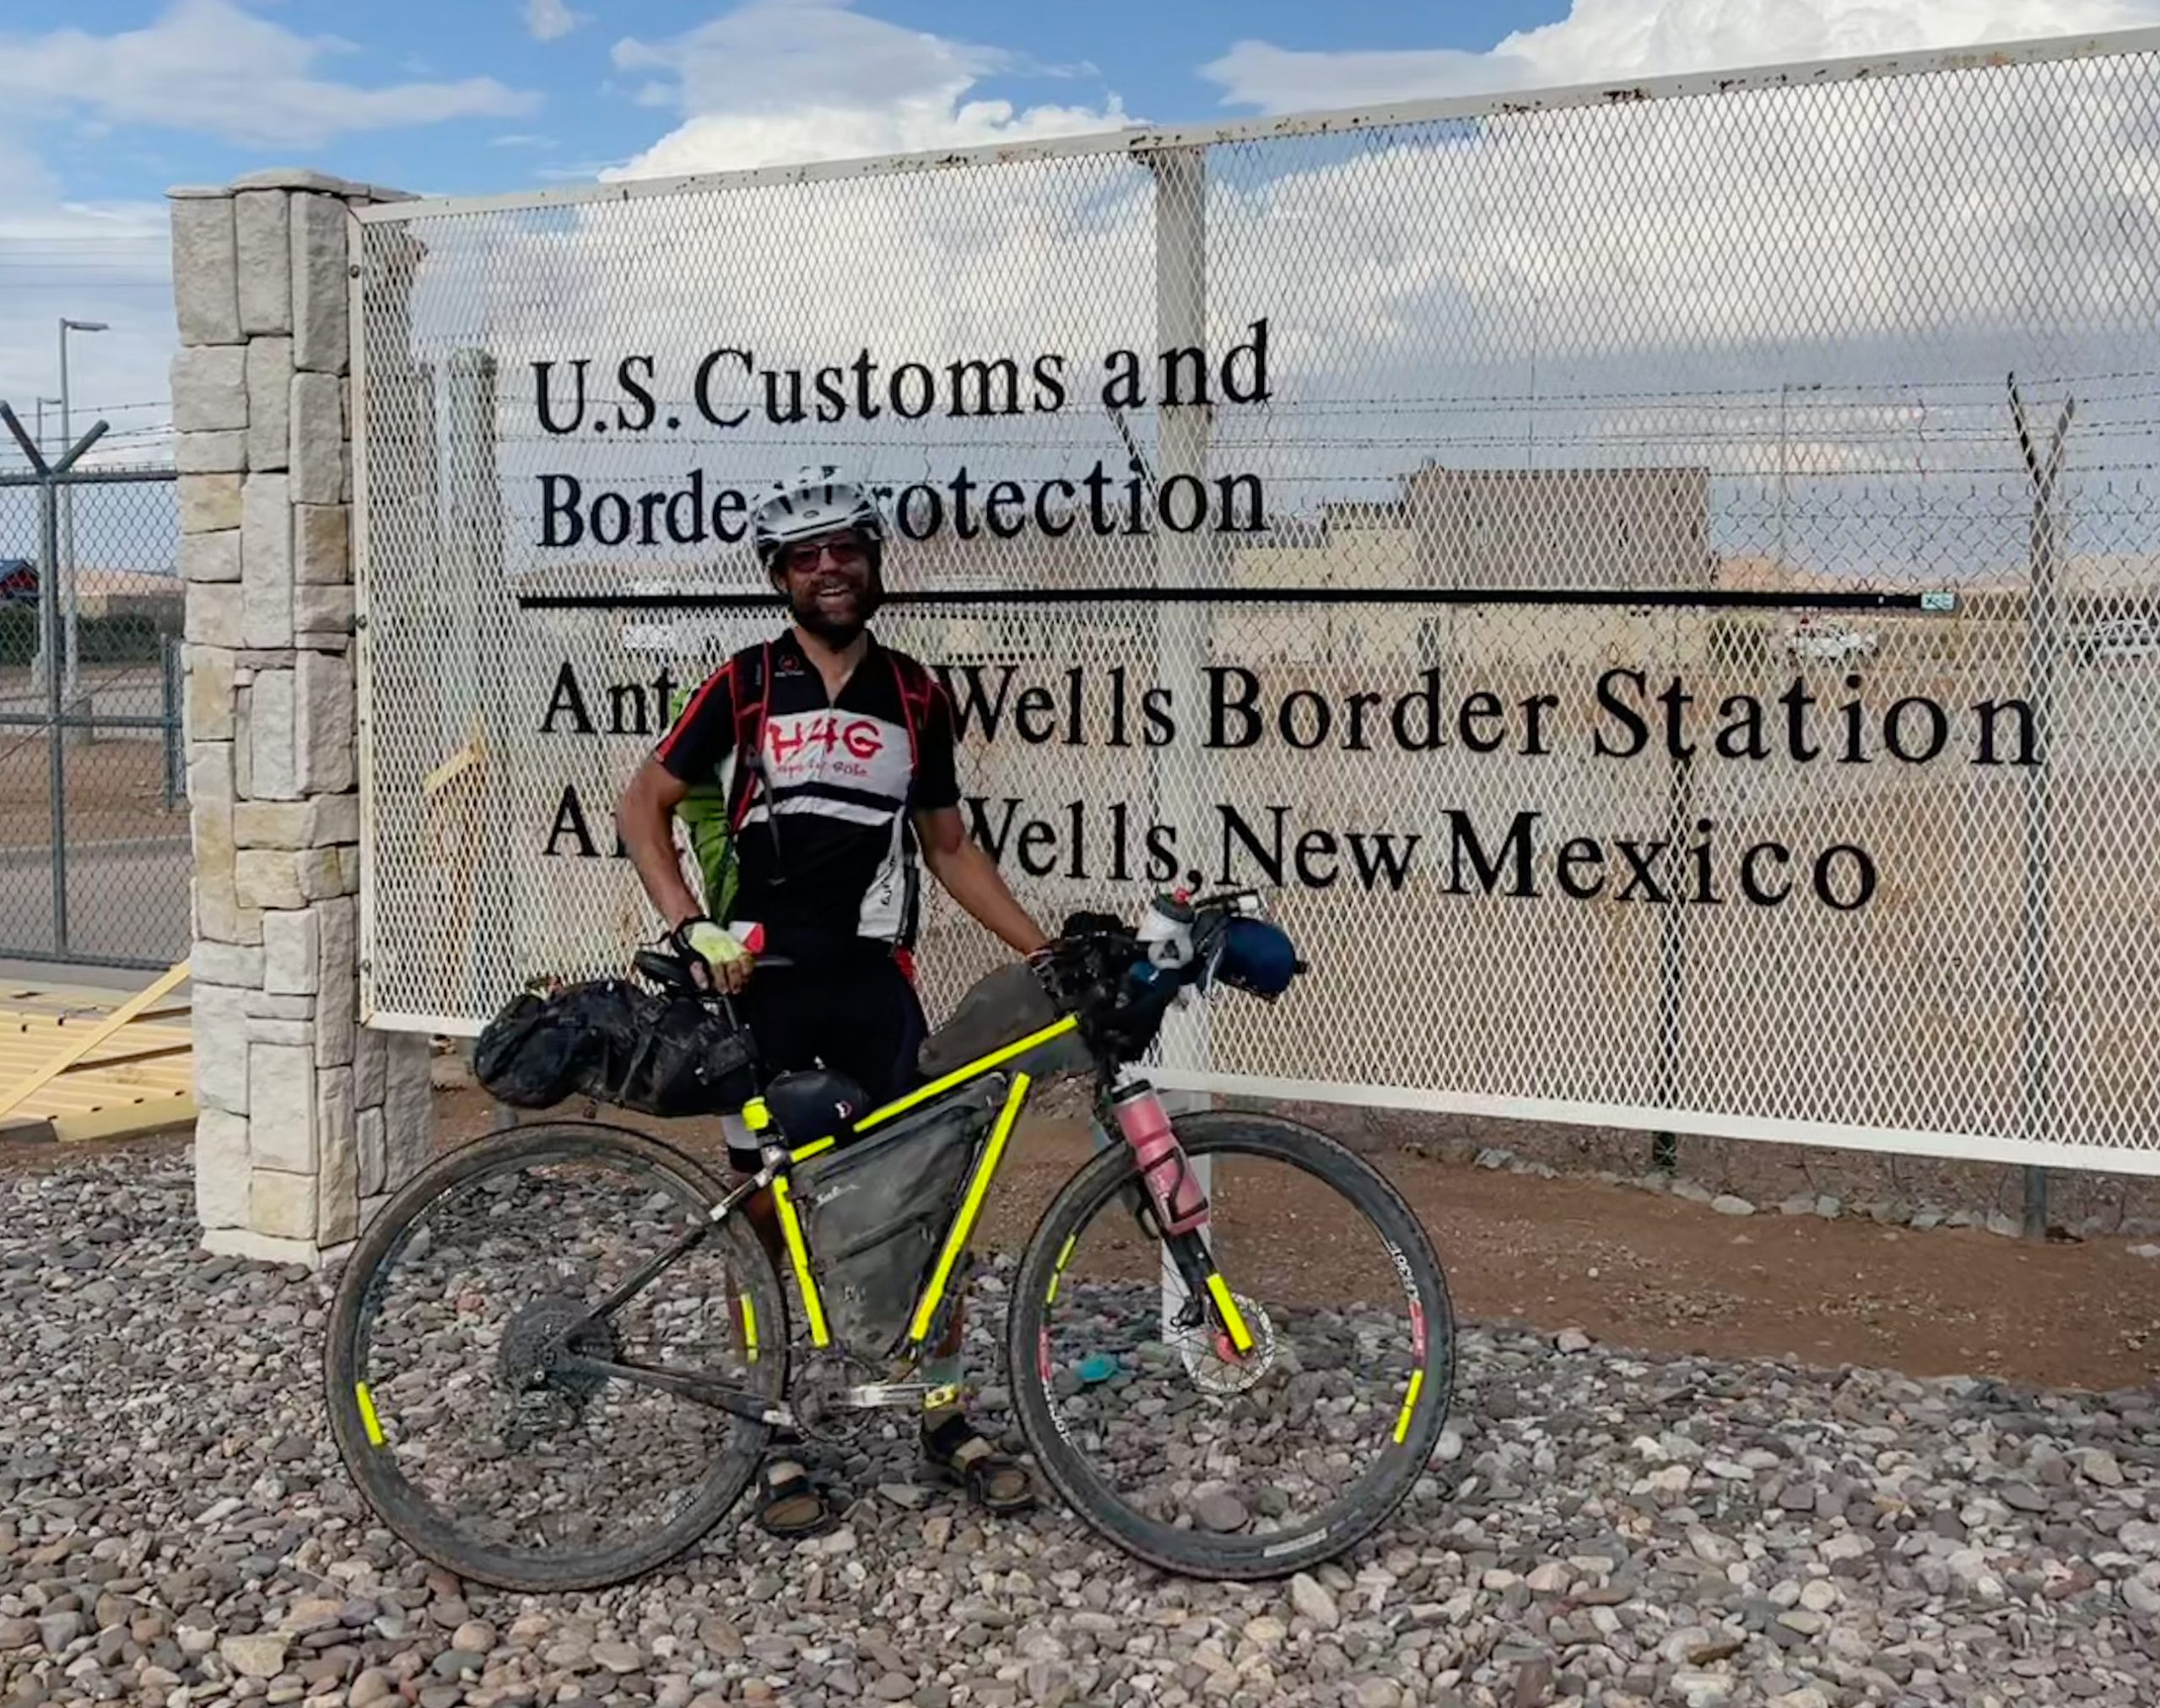 Tour Divide 2022 – Day 18 – June 28th, 2022 – Finishing the Tour Divide on our 19th wedding anniversary